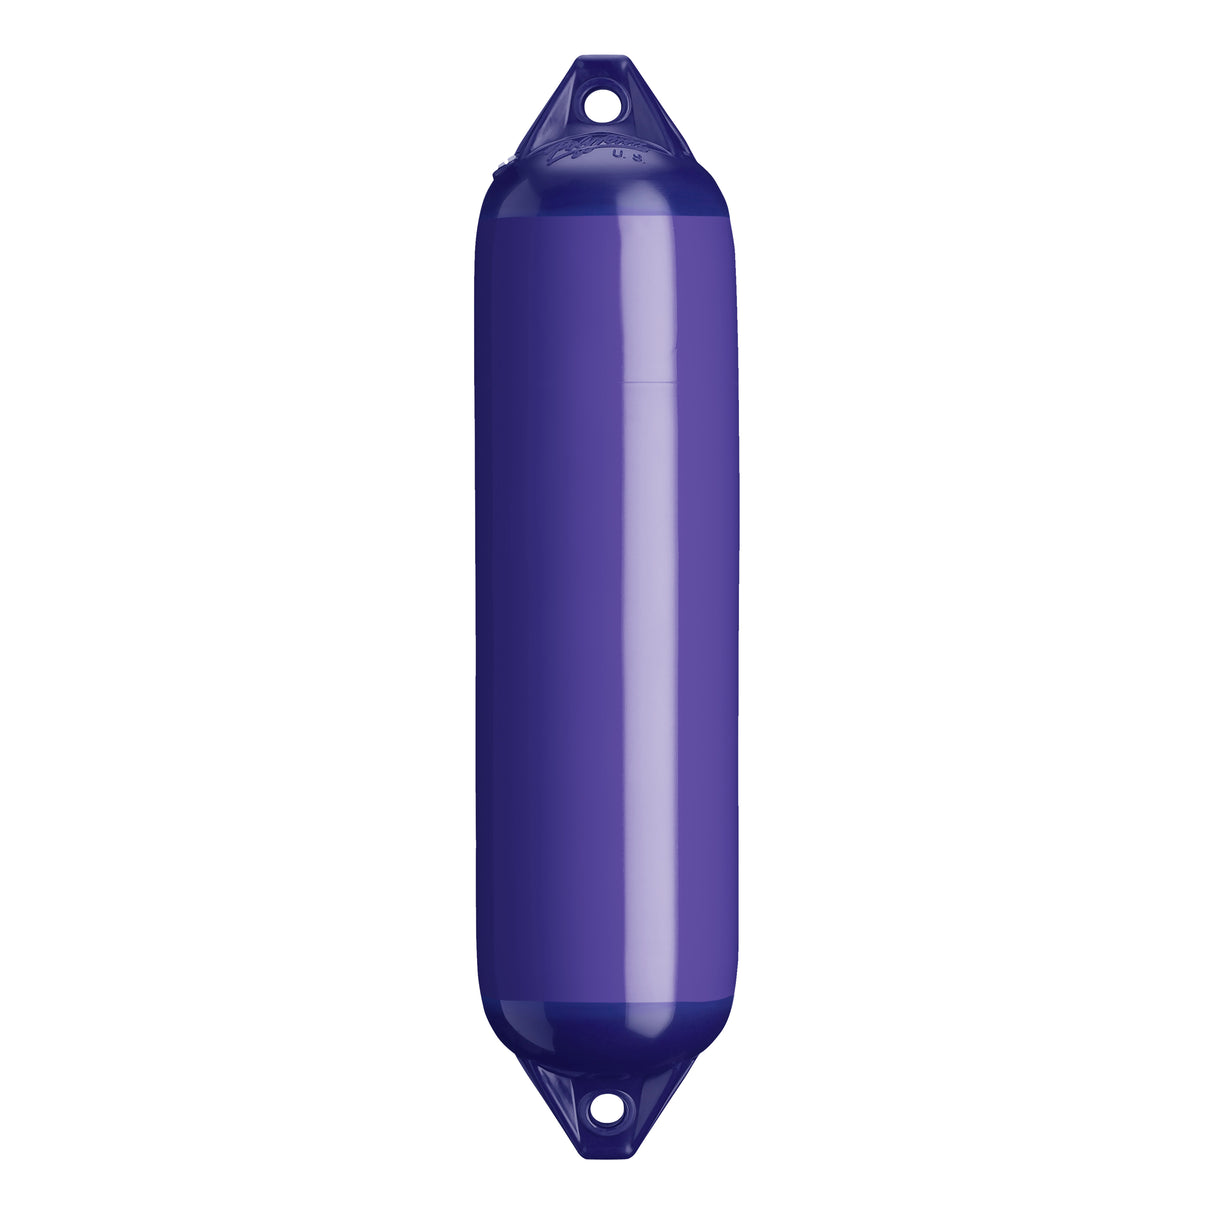 Purple boat fender with Navy-Top, Polyform F-1 